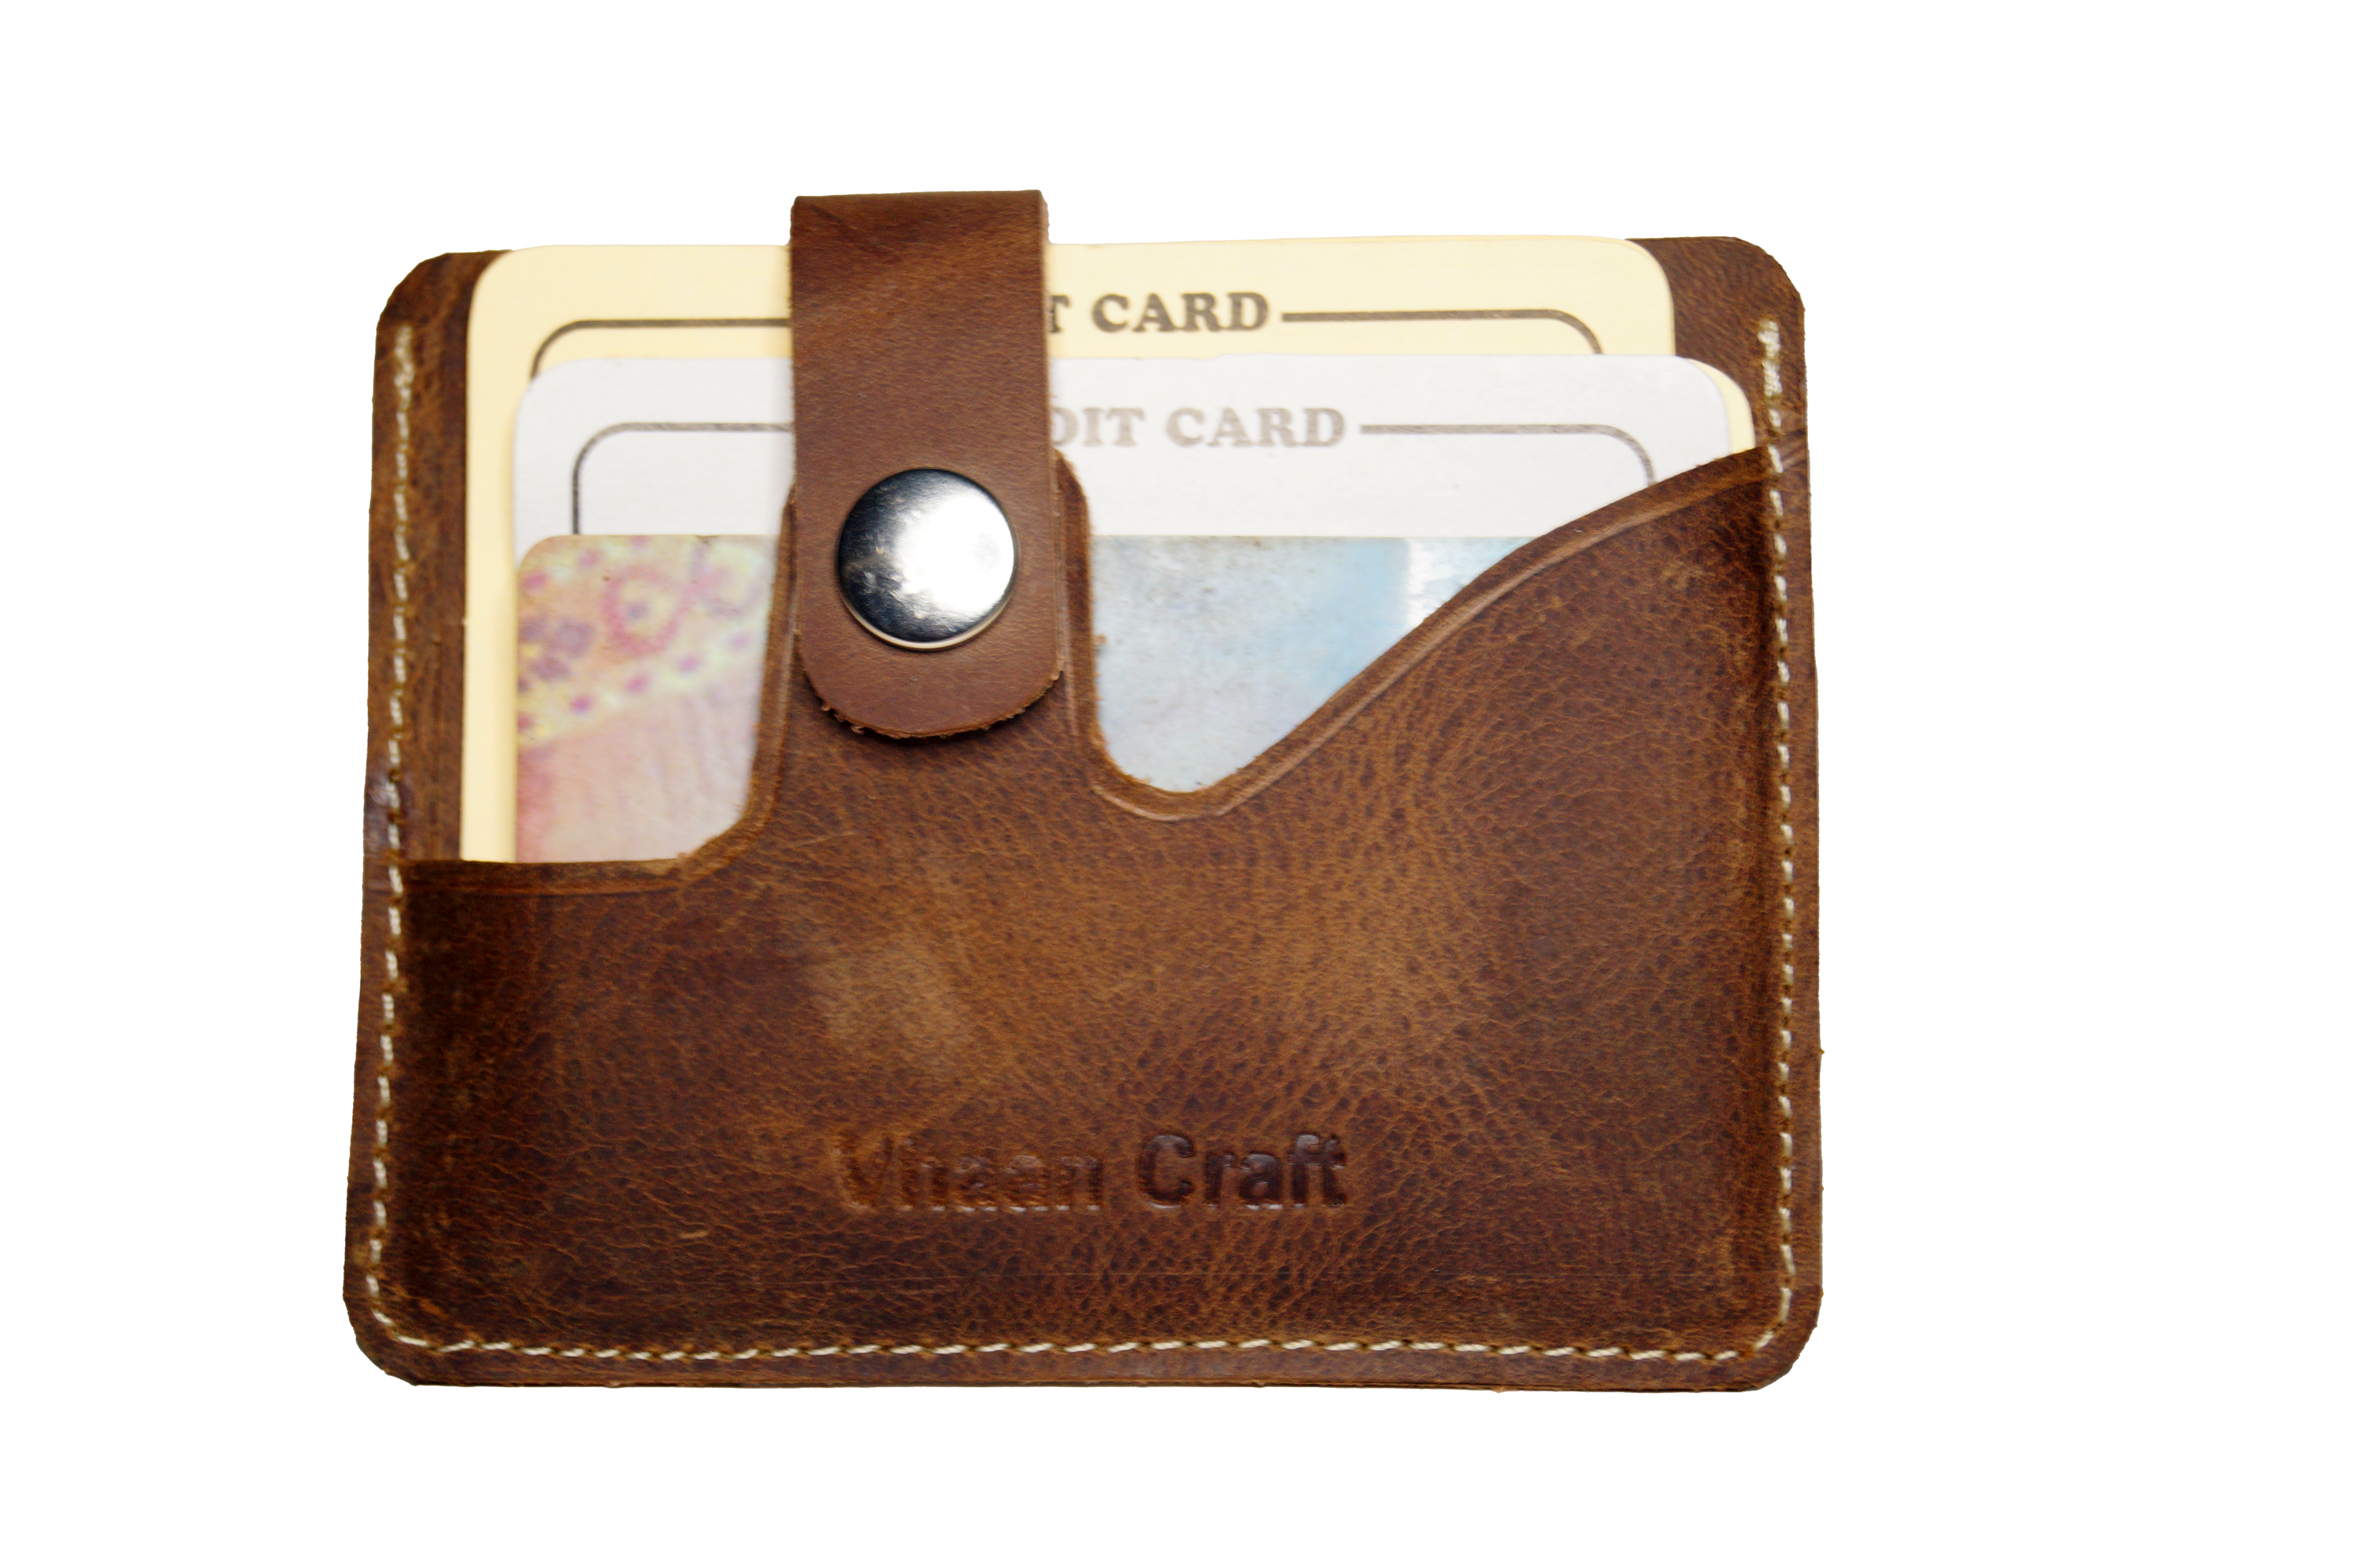 Vhaan's Heritage Oil Pulled Up Leather Card Holder - RAW shade